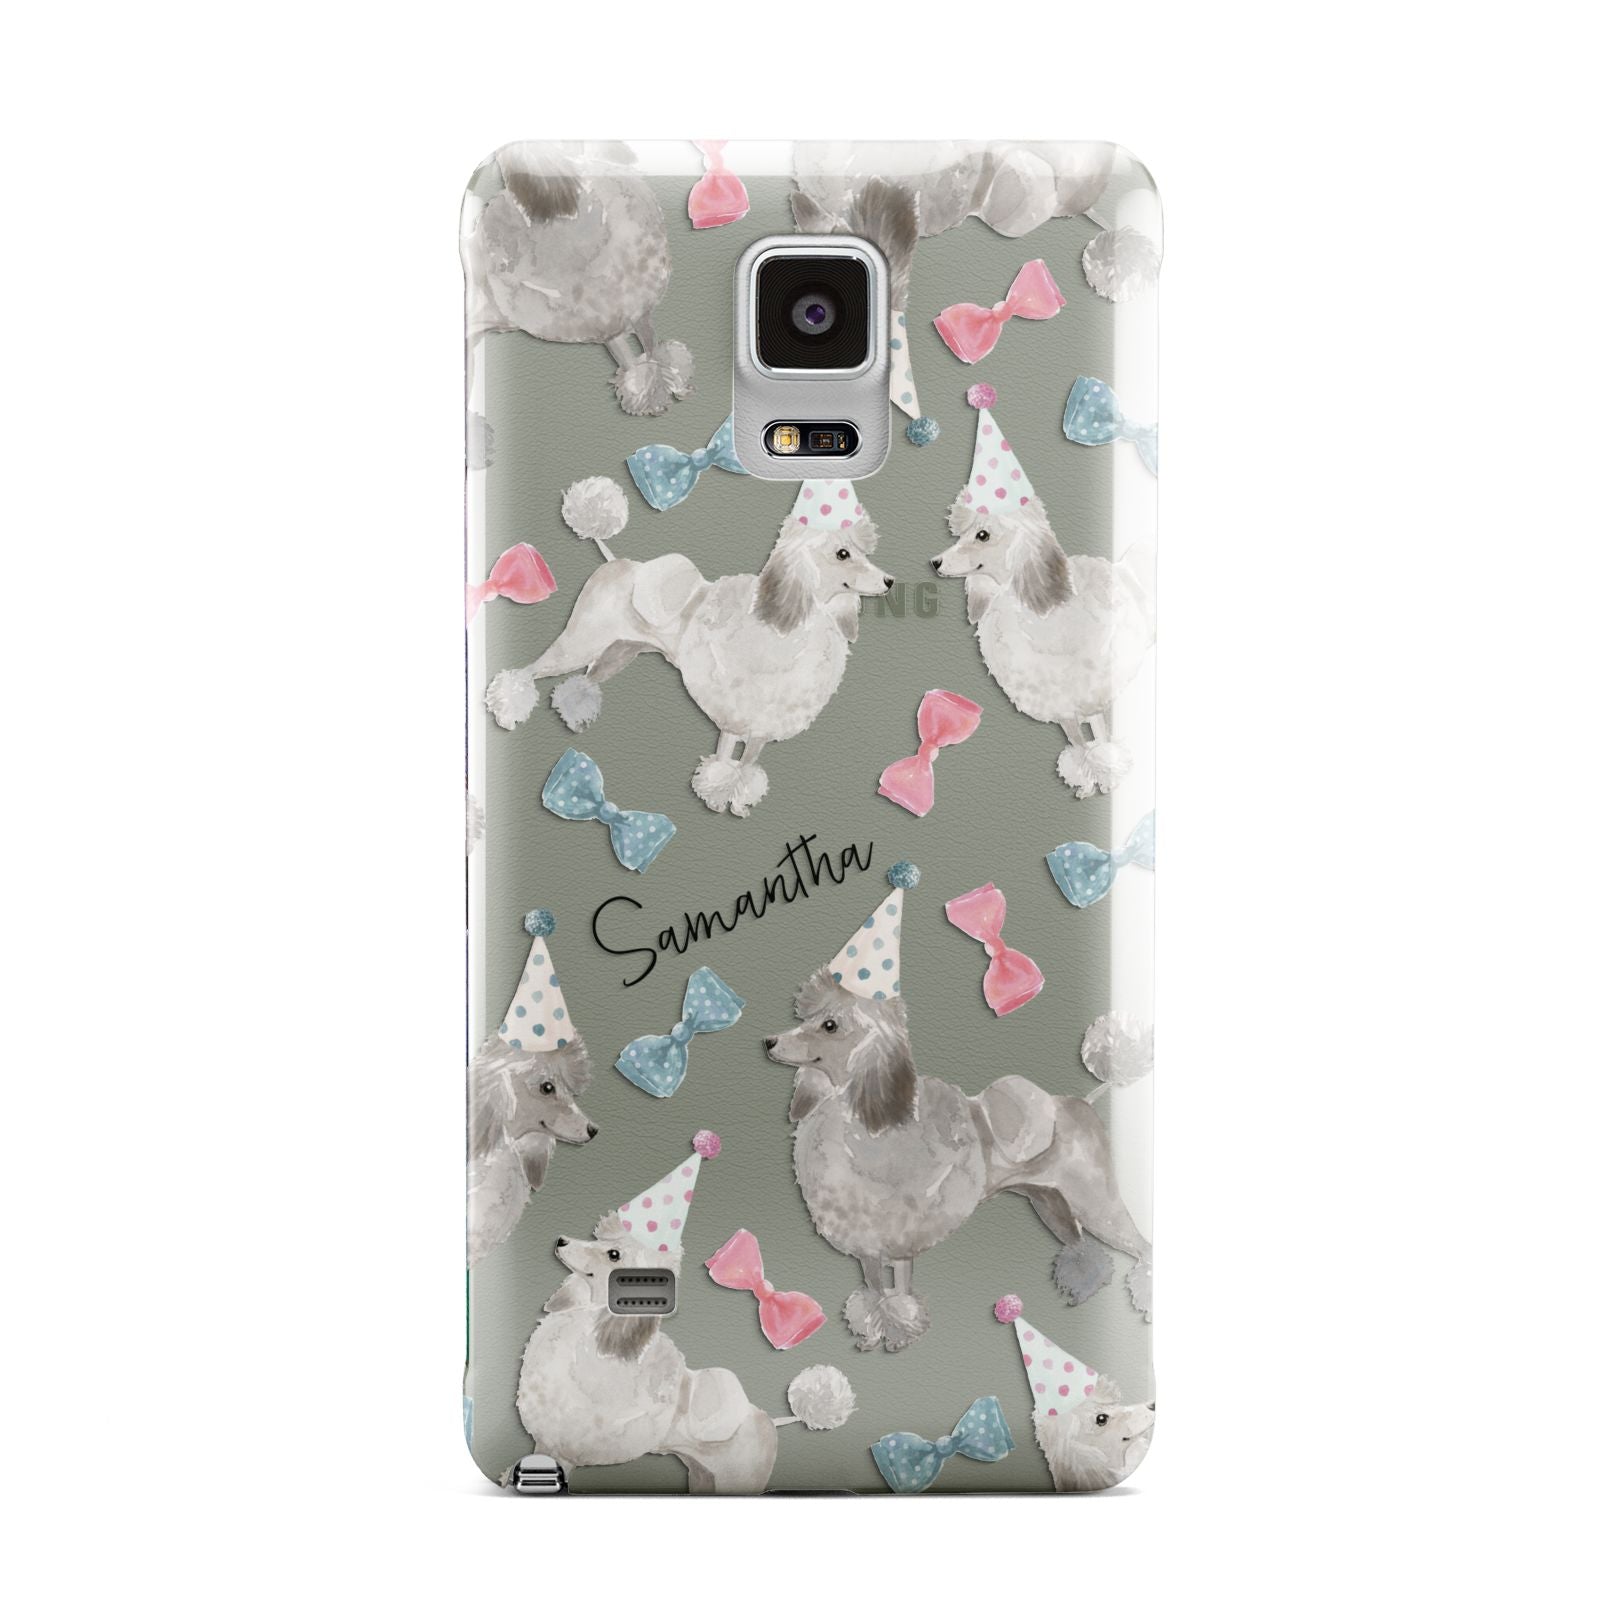 Personalised Poodle Dog Samsung Galaxy Note 4 Case